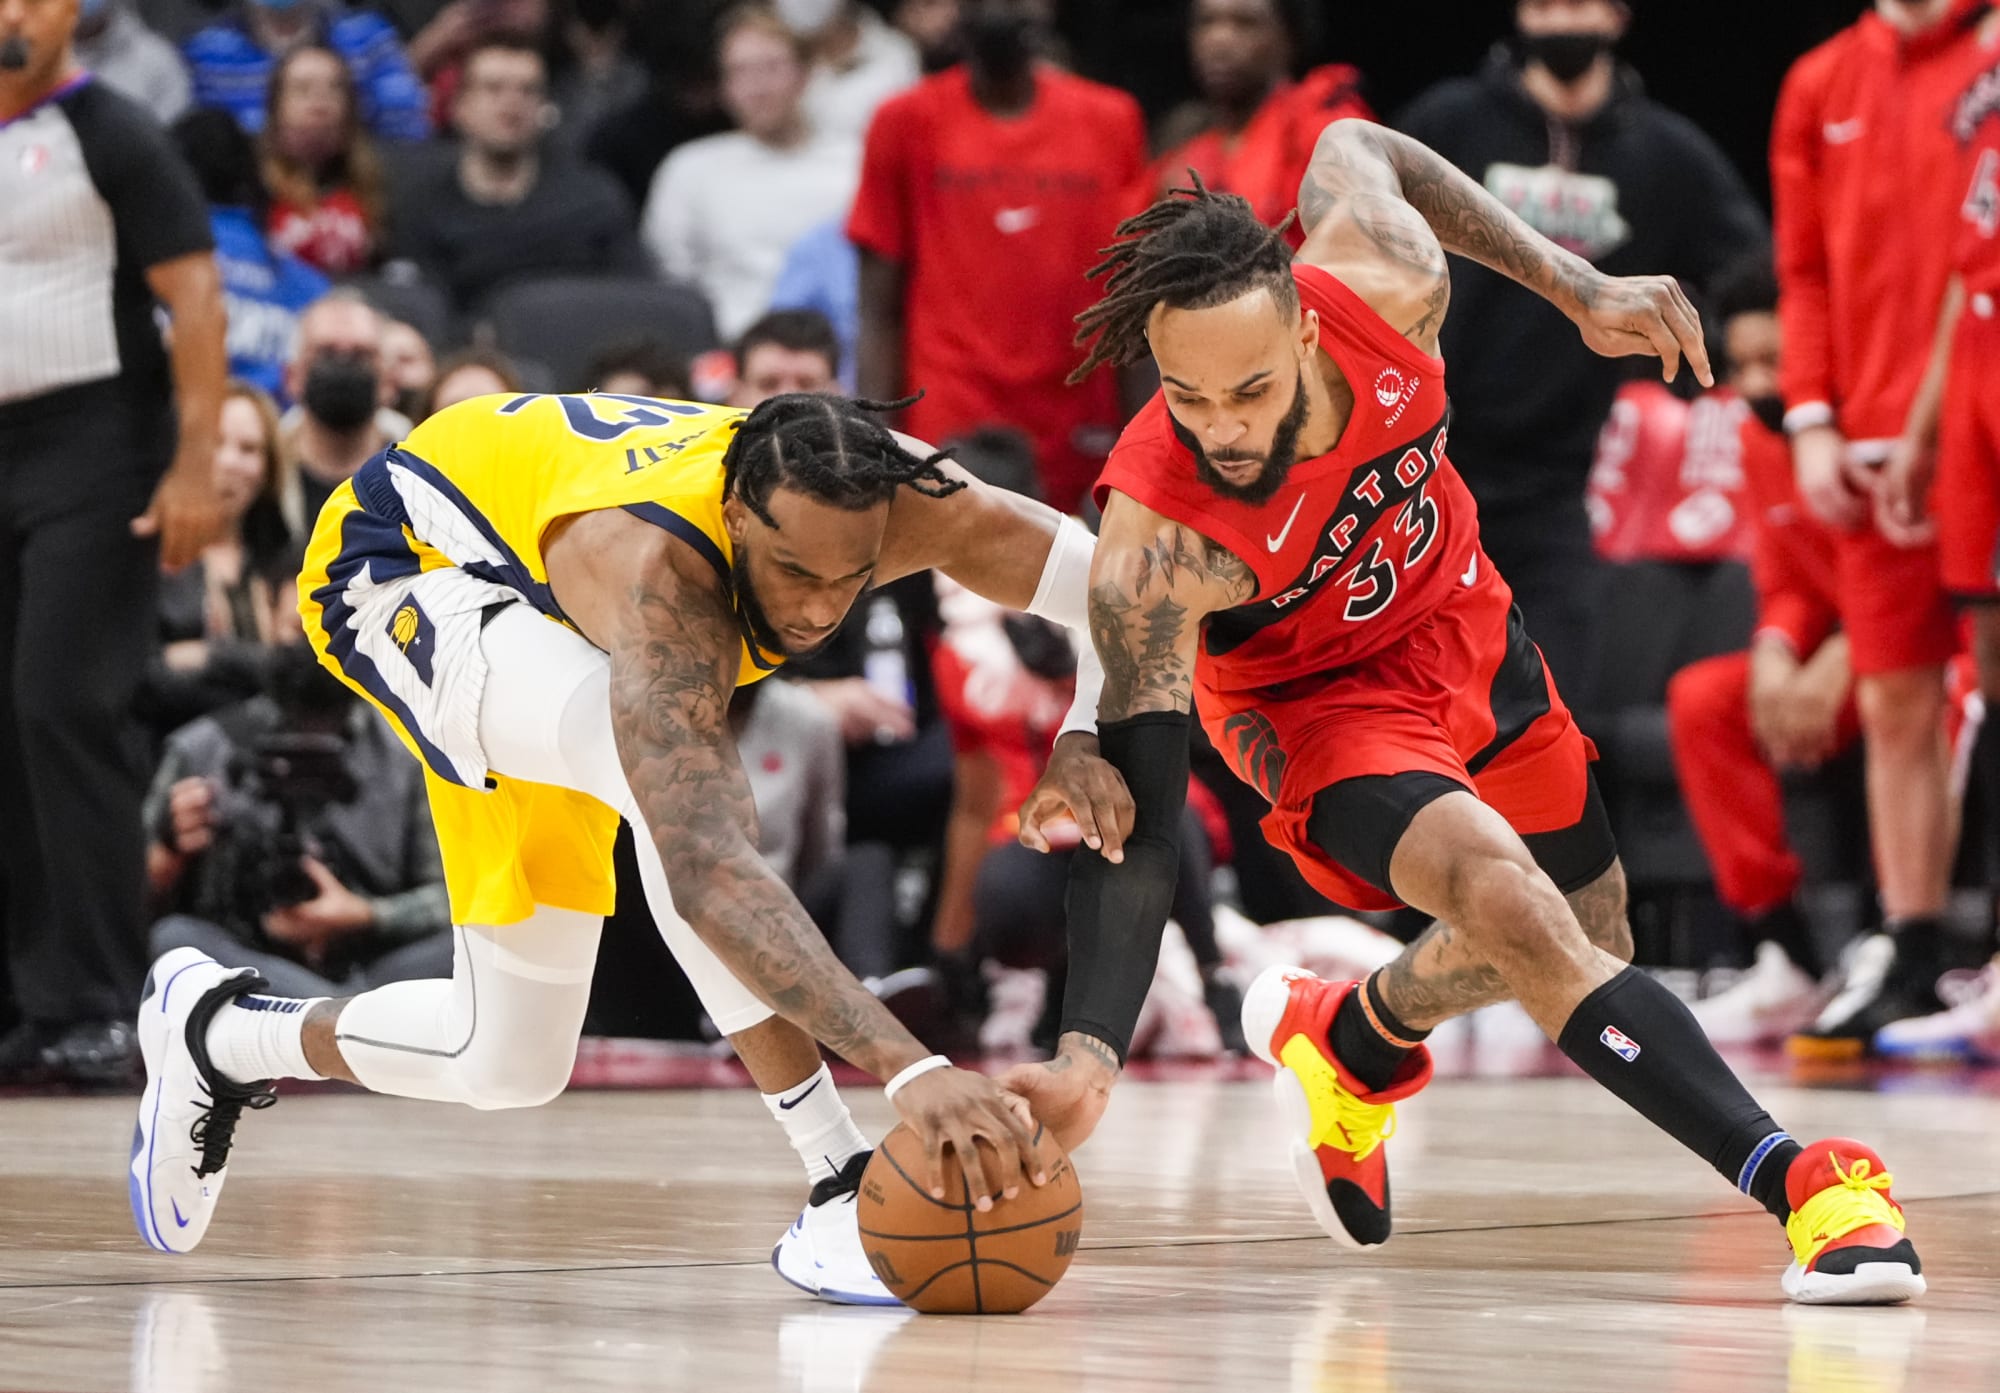 Gary Trent Junior racks up points - and nothing else - in Raptors win